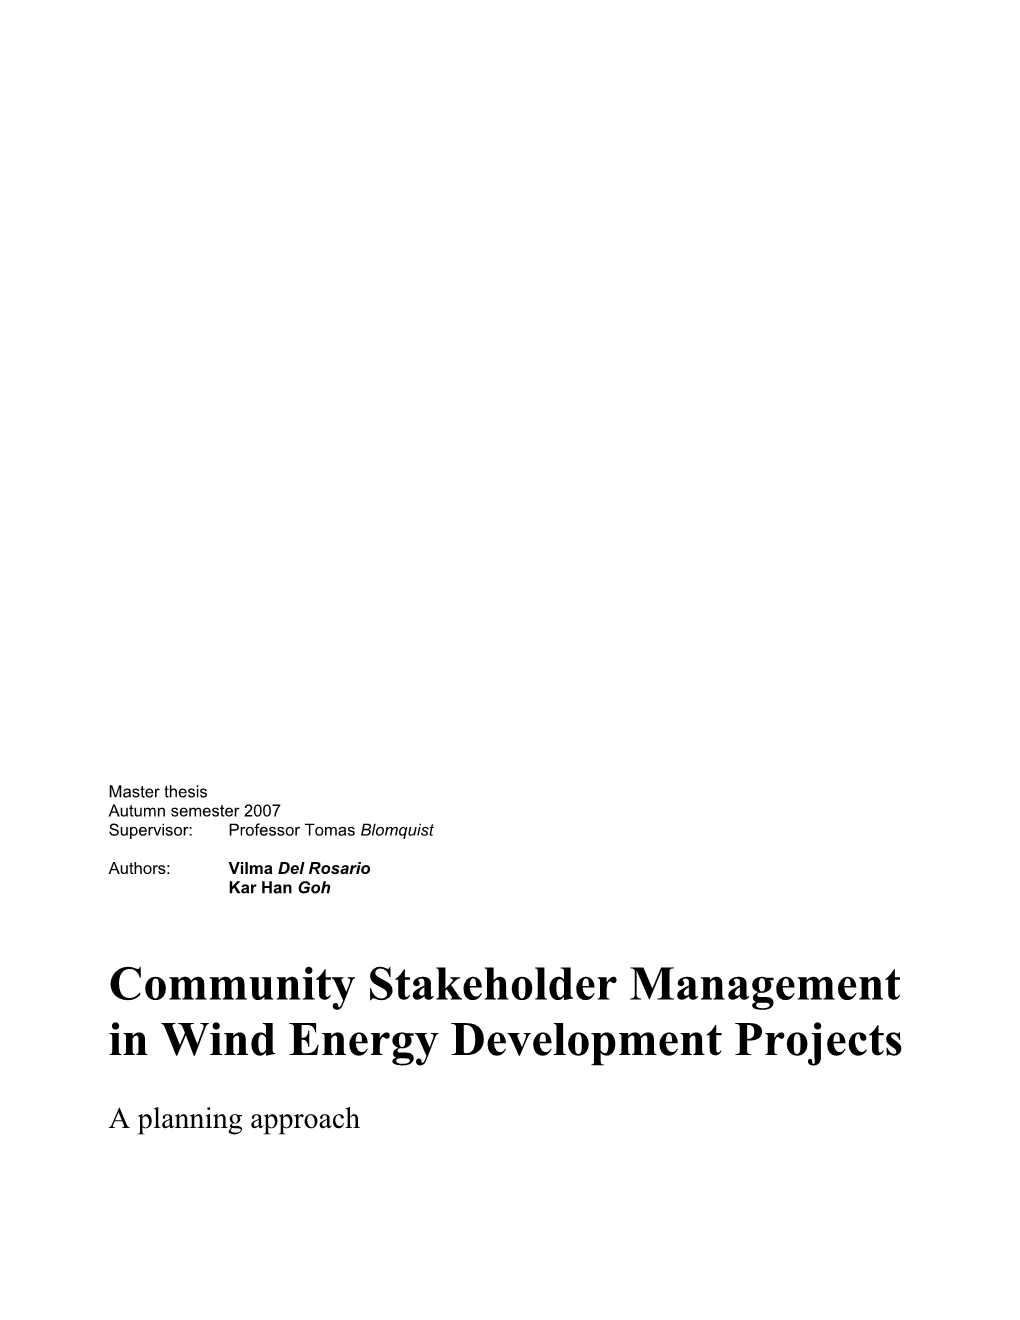 Community Stakeholder Management in Wind Energy Development Projects